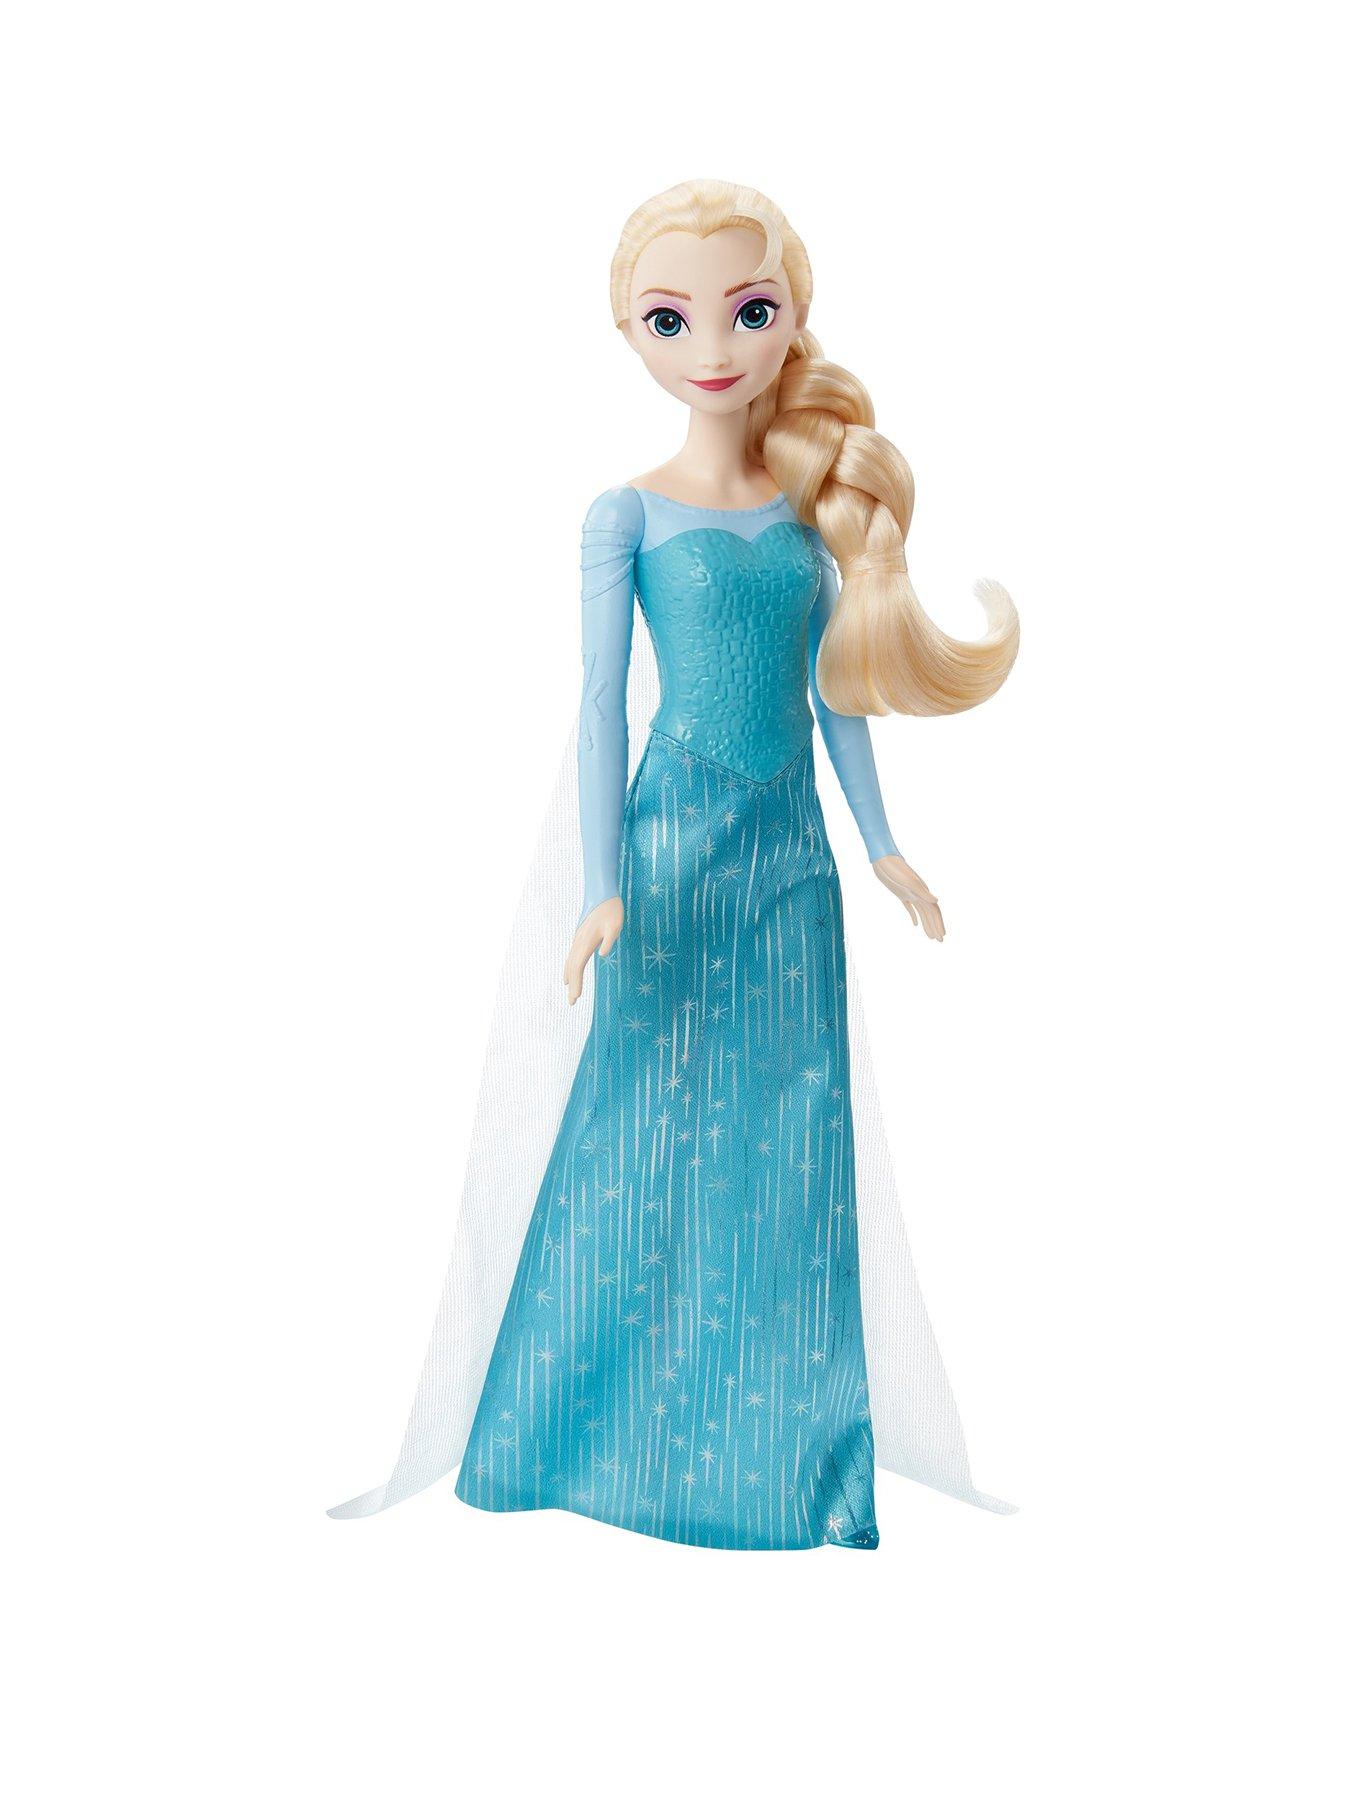 About: Come Play With Me - Elsa and Anna Adventures (Google Play